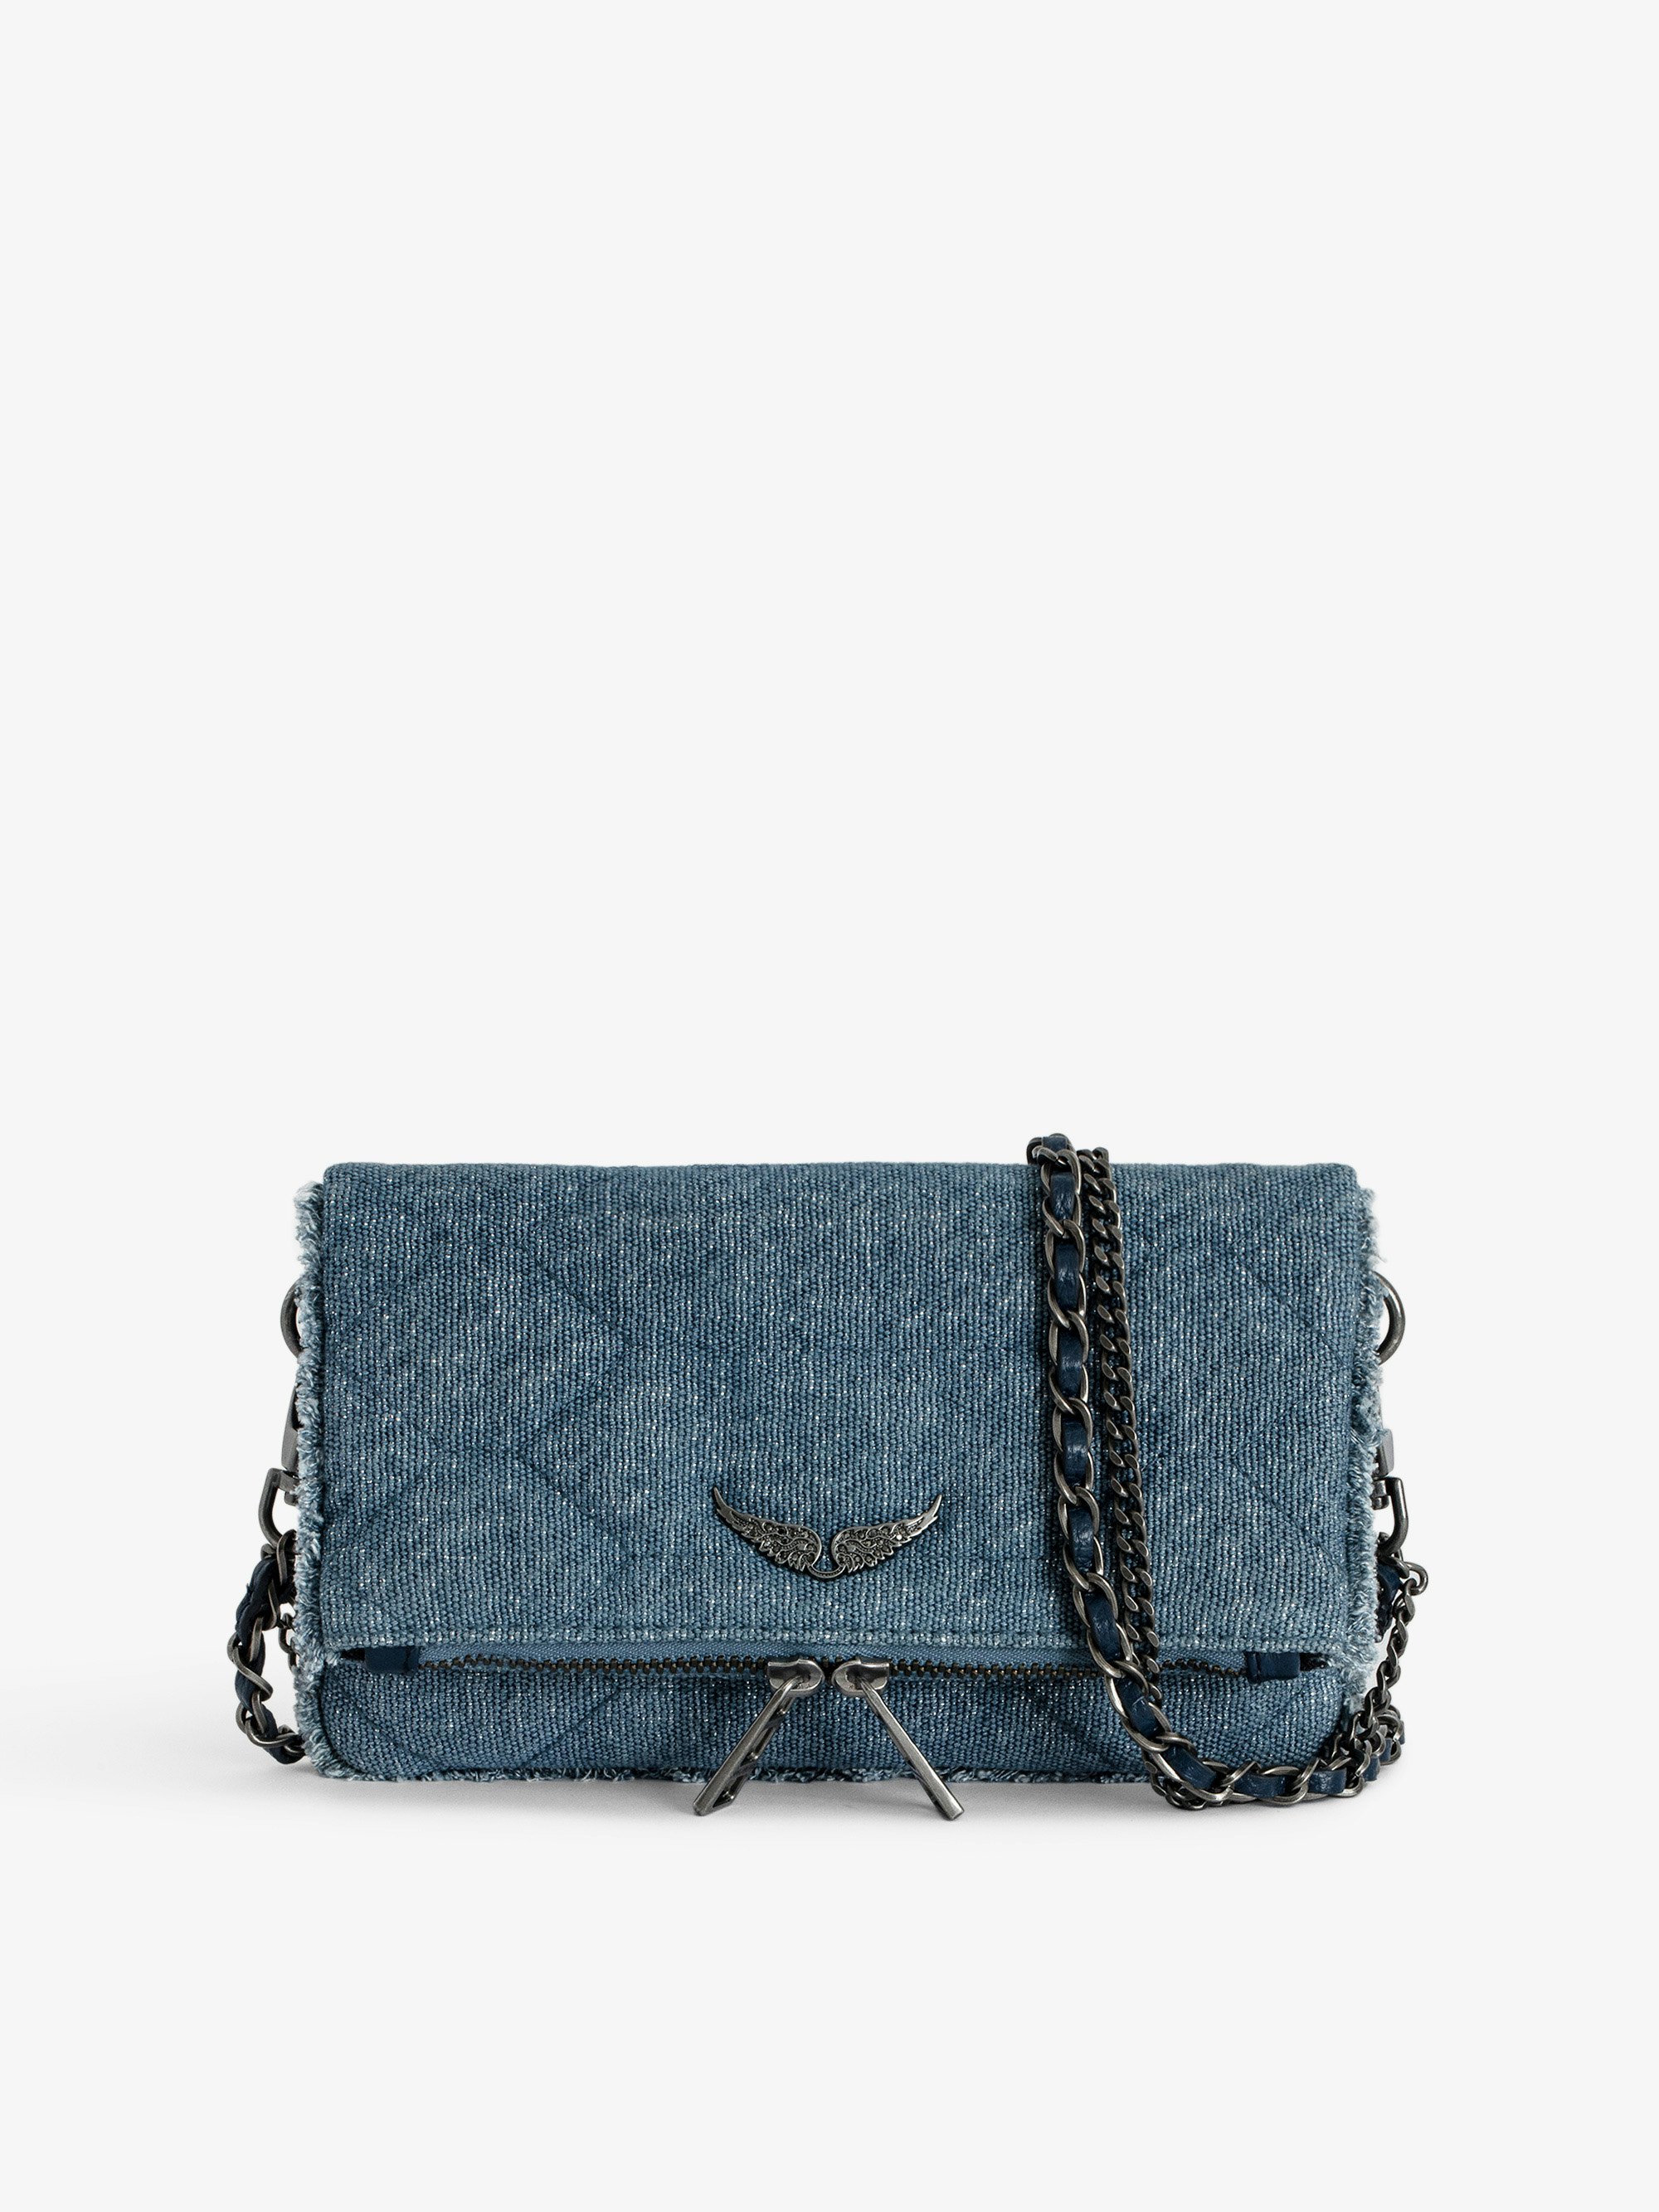 Rock Nano Glitter Denim Quilted Clutch - Small blue glitter denim quilted clutch with double leather and metal chain strap and charms.